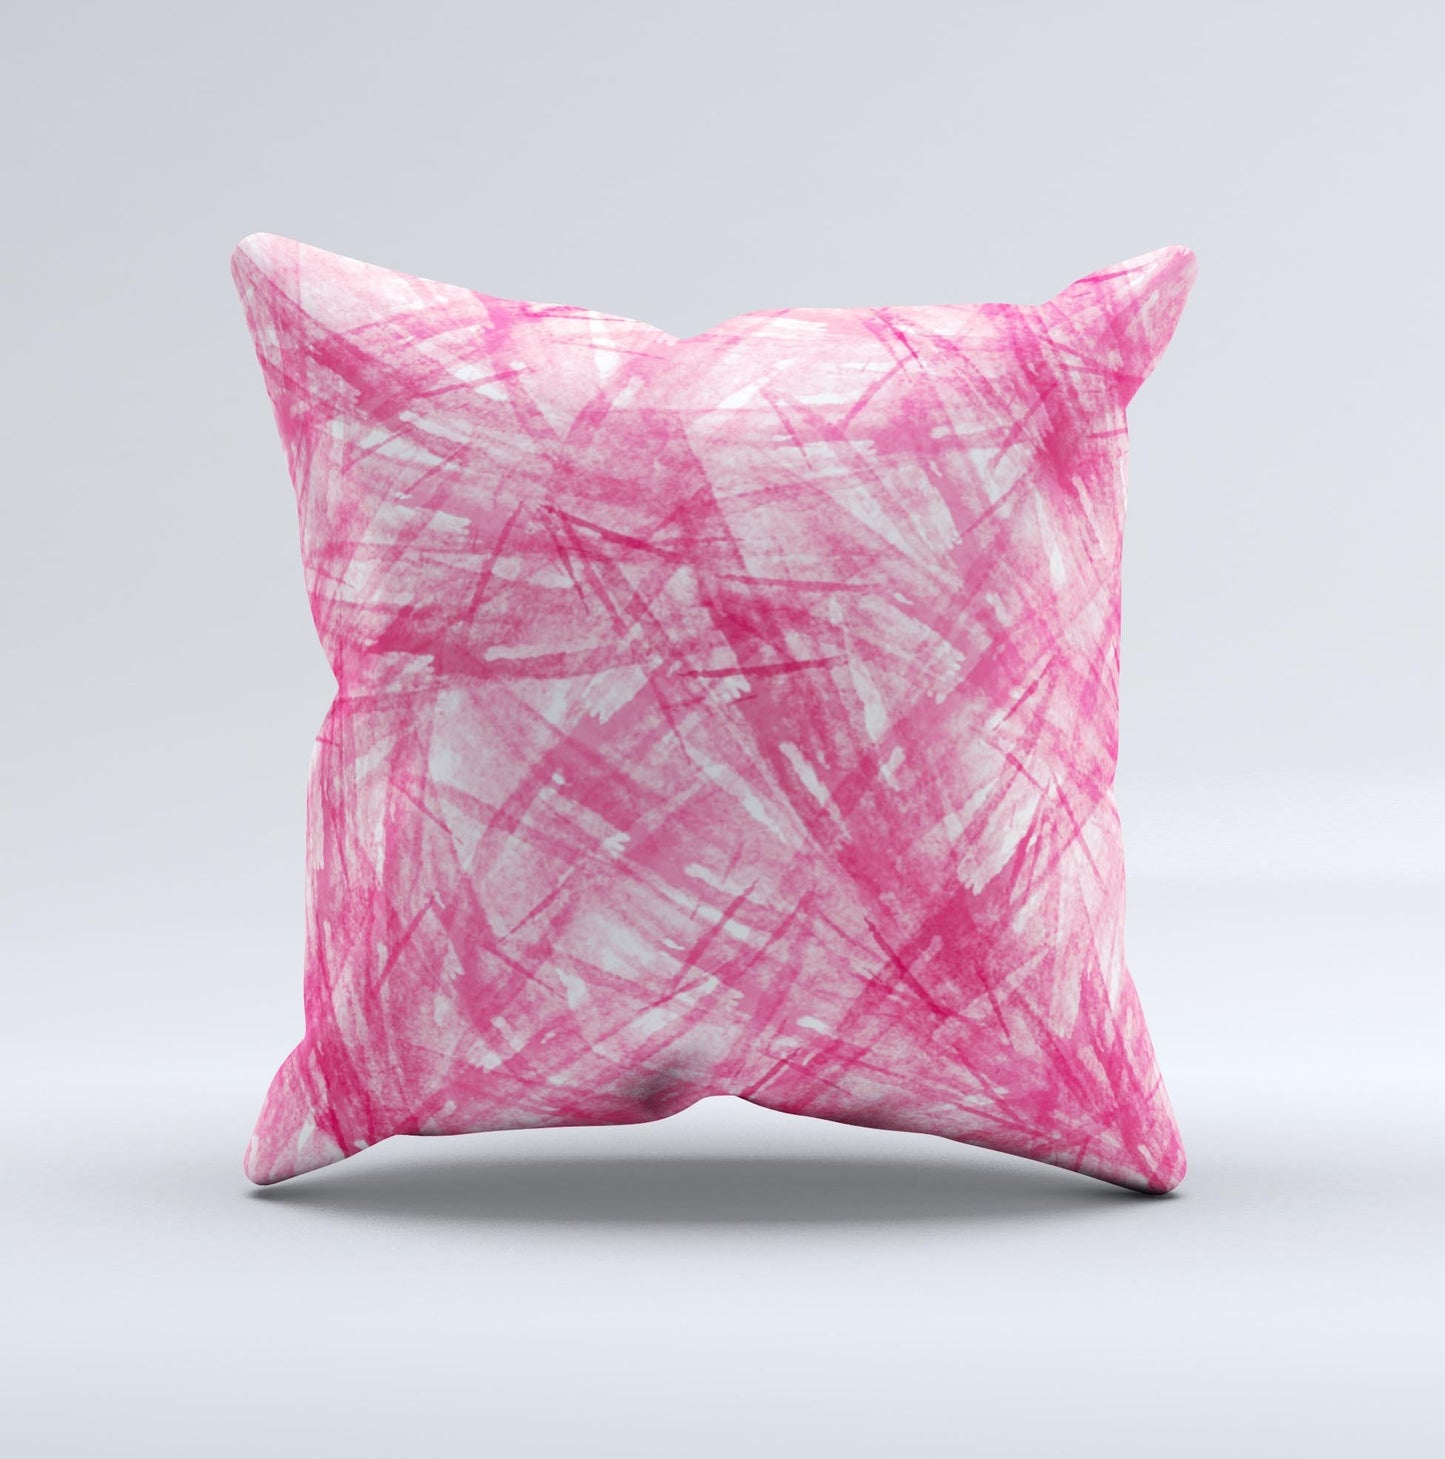 Subtle Pink Watercolor Strokes Ink-Fuzed Decorative Throw Pillow